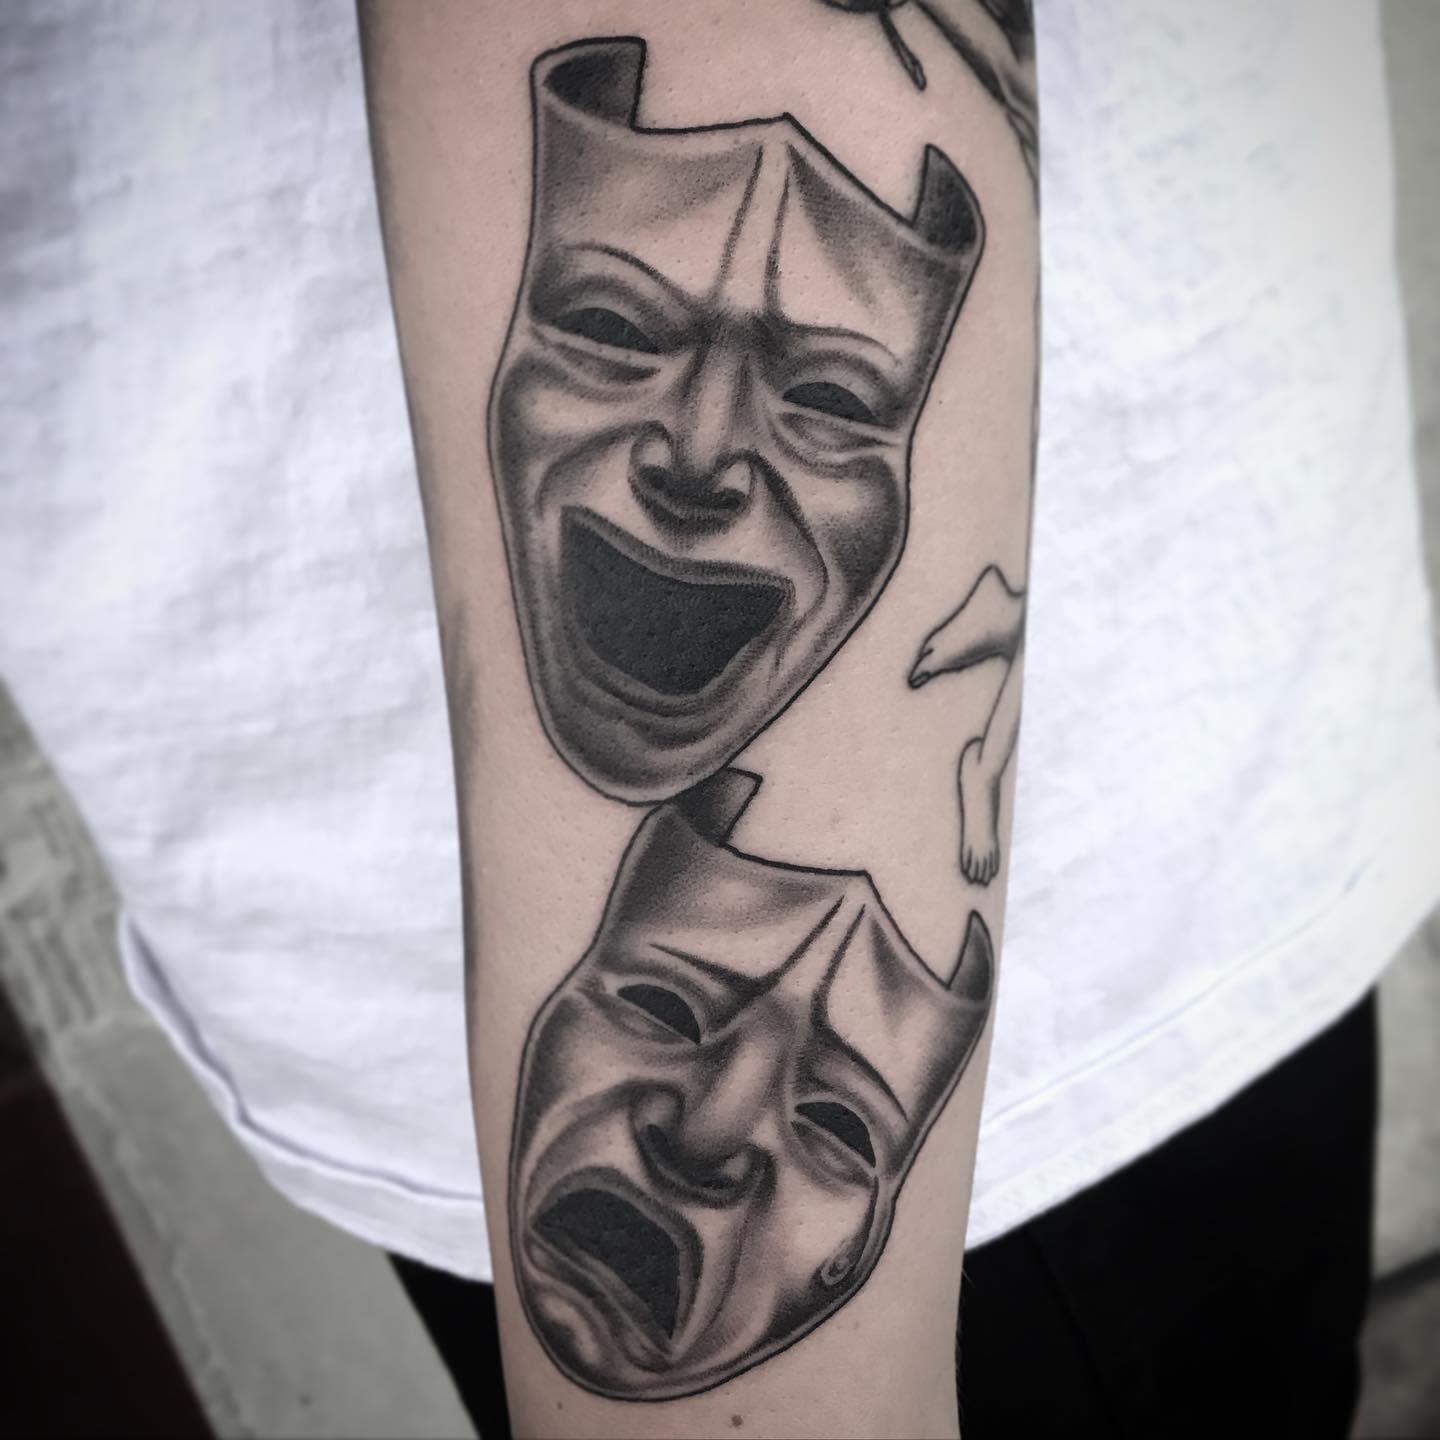 Mask Smile Now Cry Later Tattoo -brighton.bold